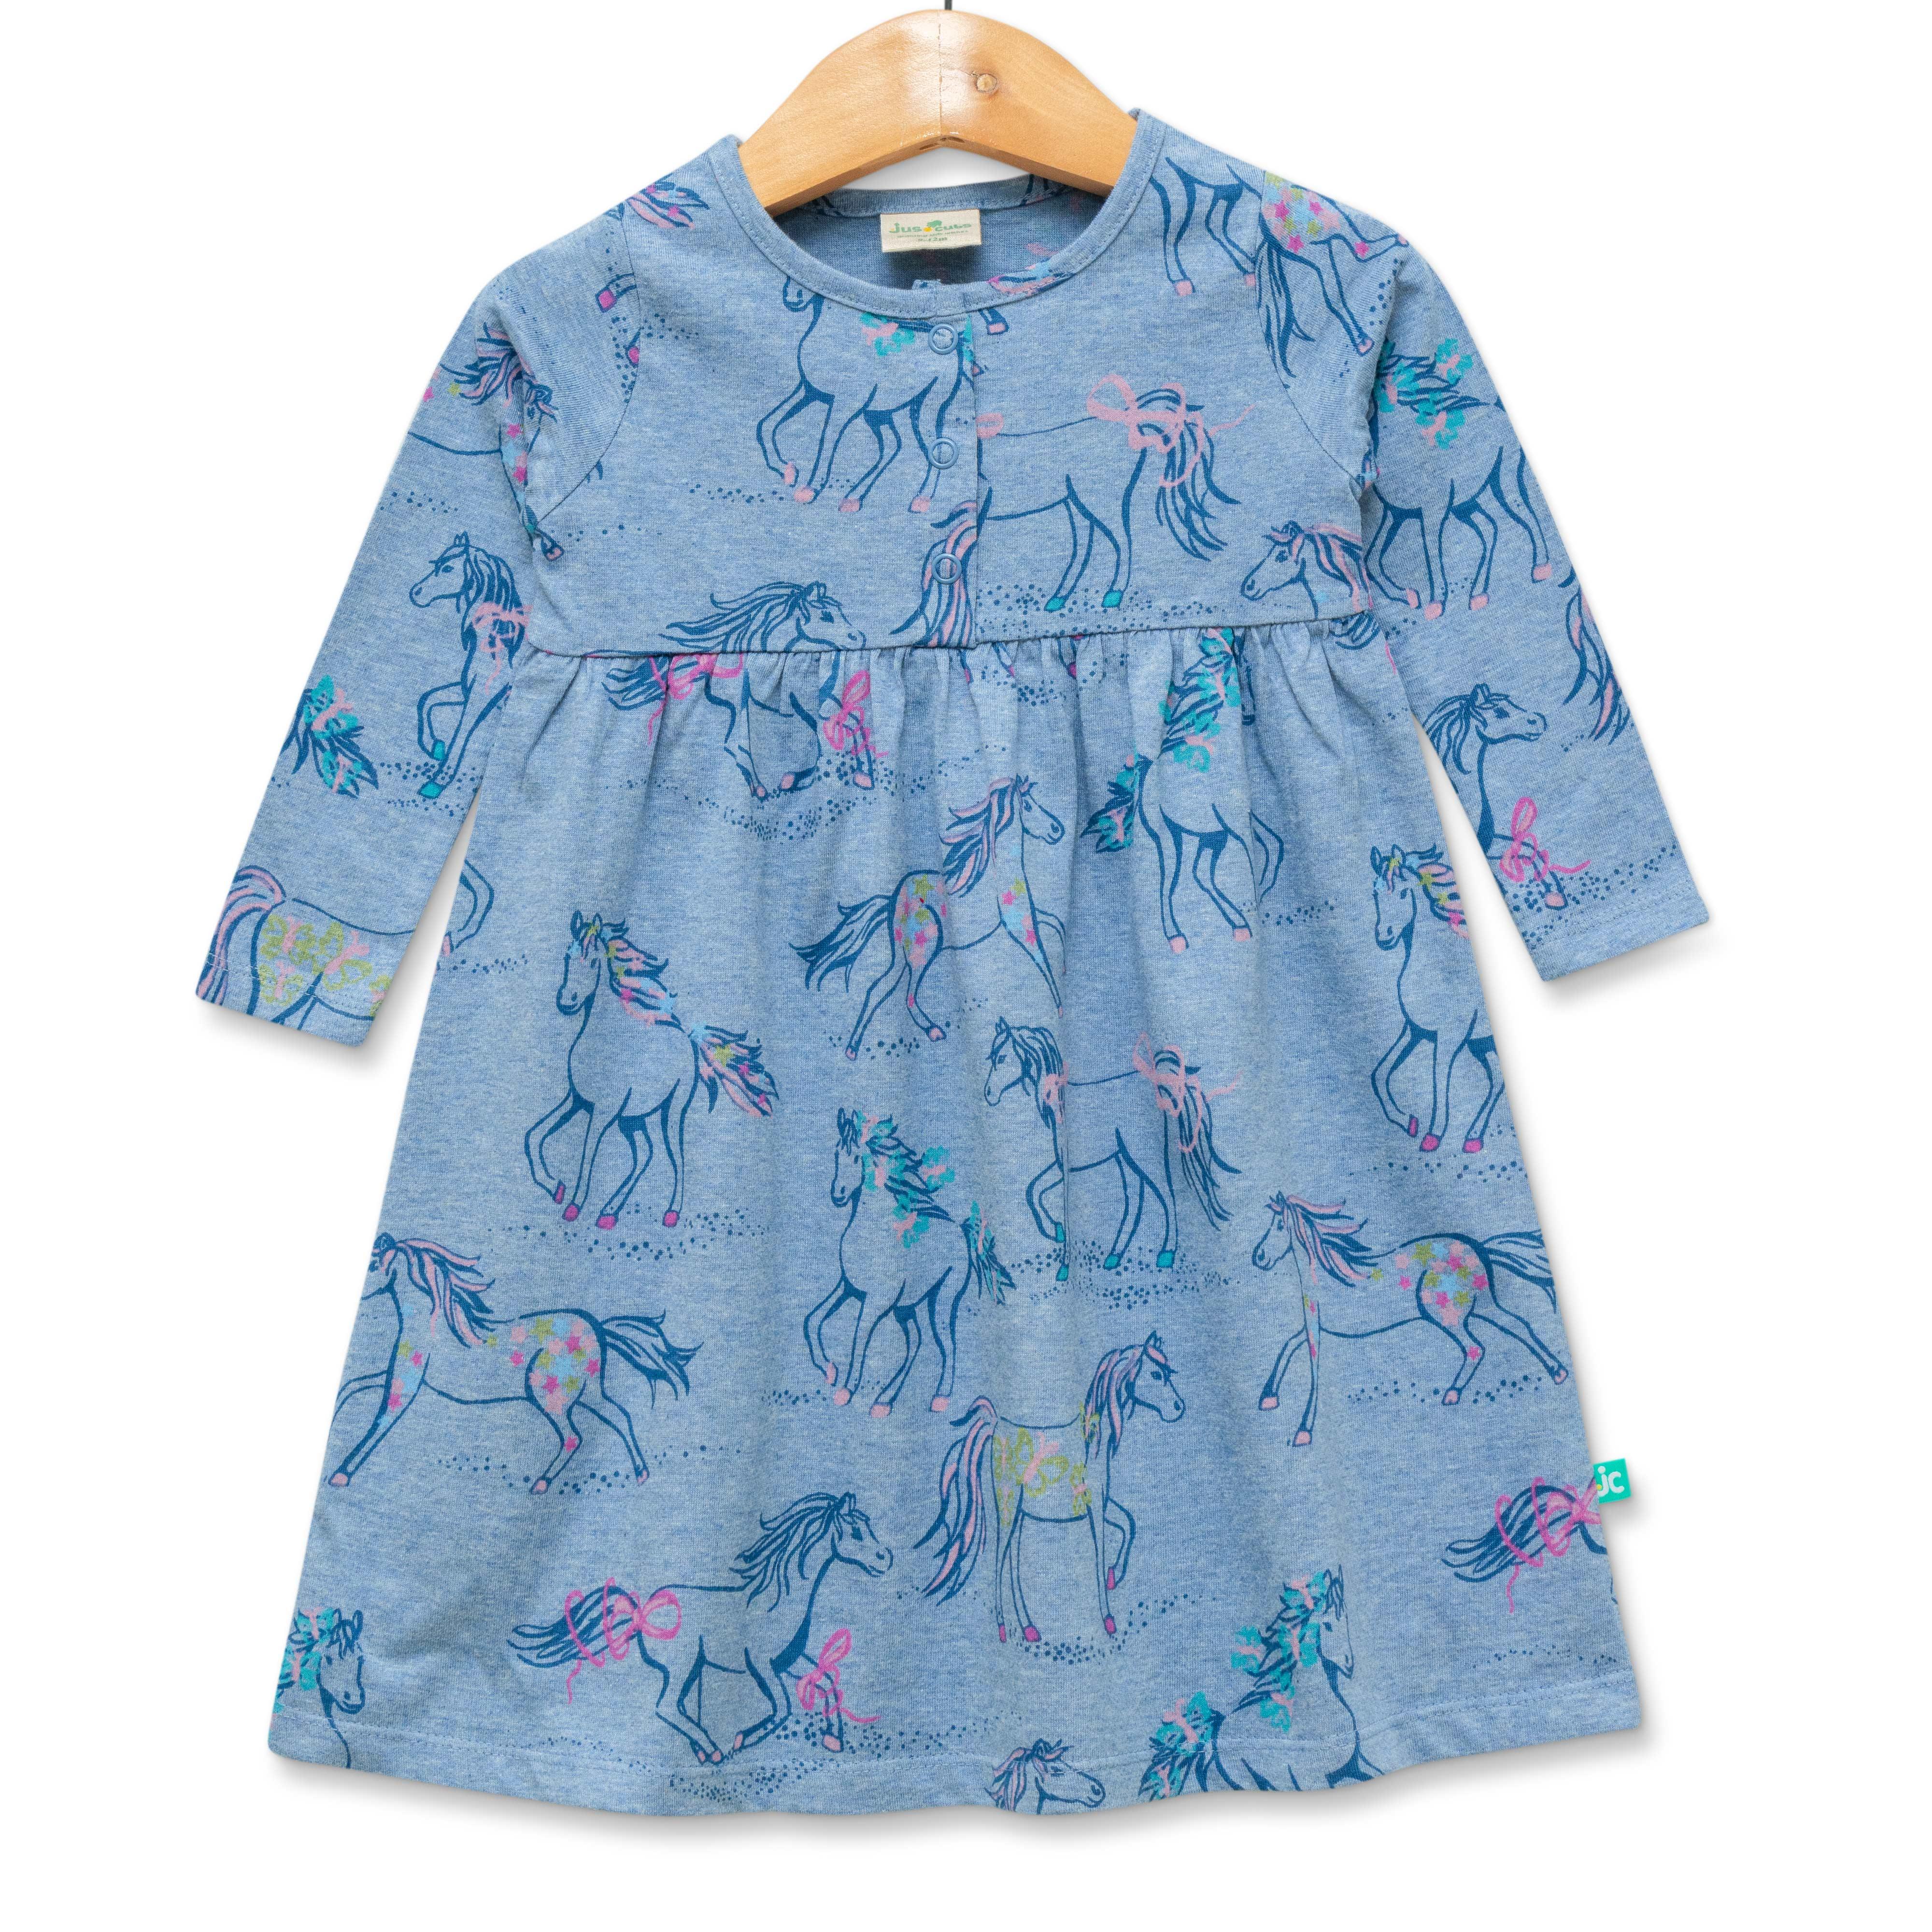 Baby Girls All Over Printed Casual Dress - Navy Blue - Juscubs